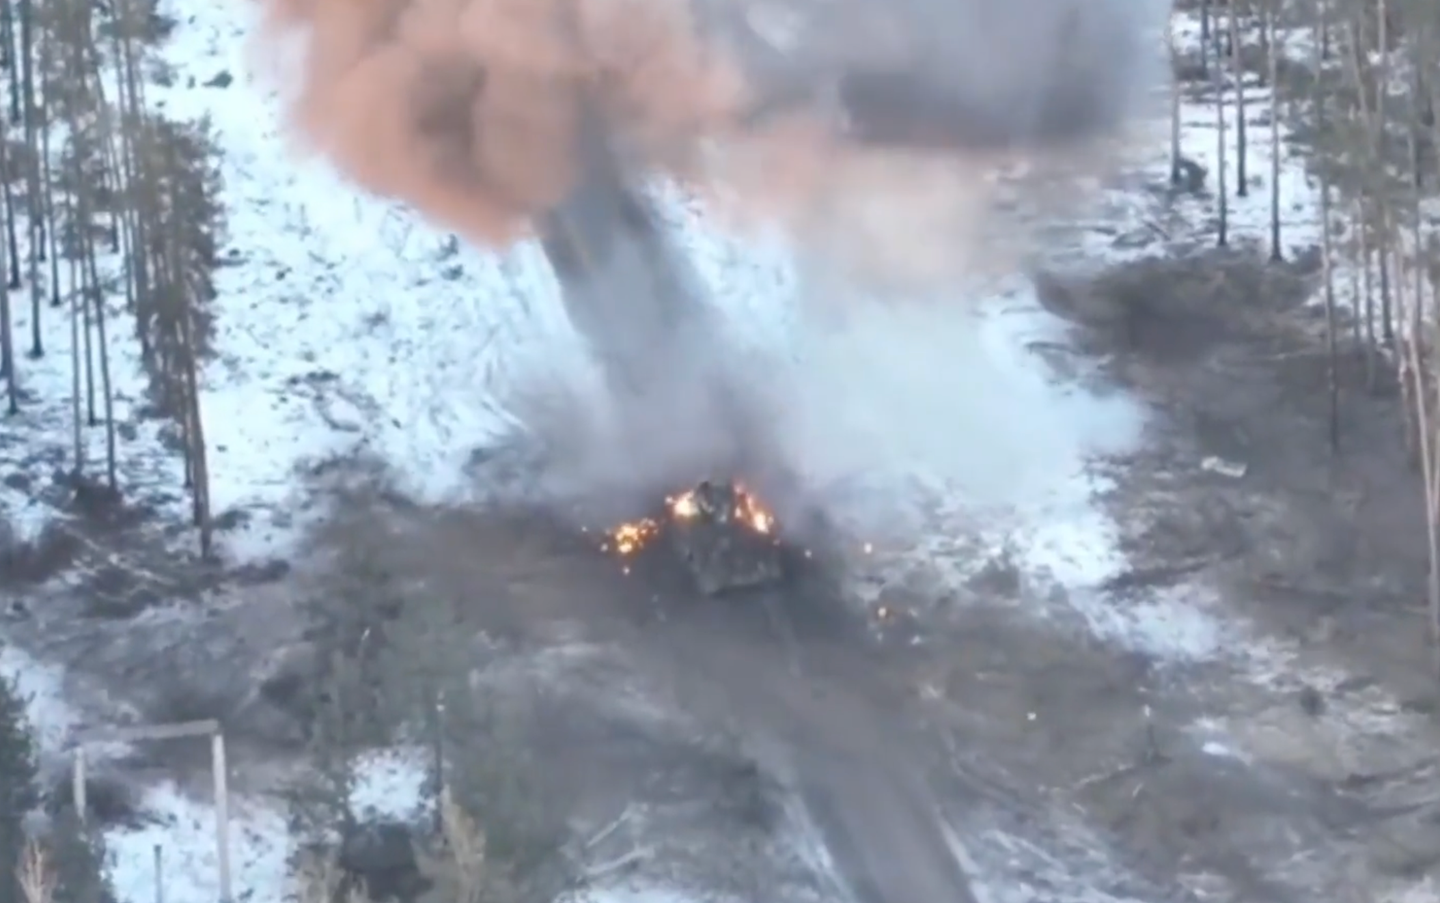 A screengrab from the video showing the aftermath of the stricken Russian Terminator vehicle. <em>Credit: Twitter screengrab</em>